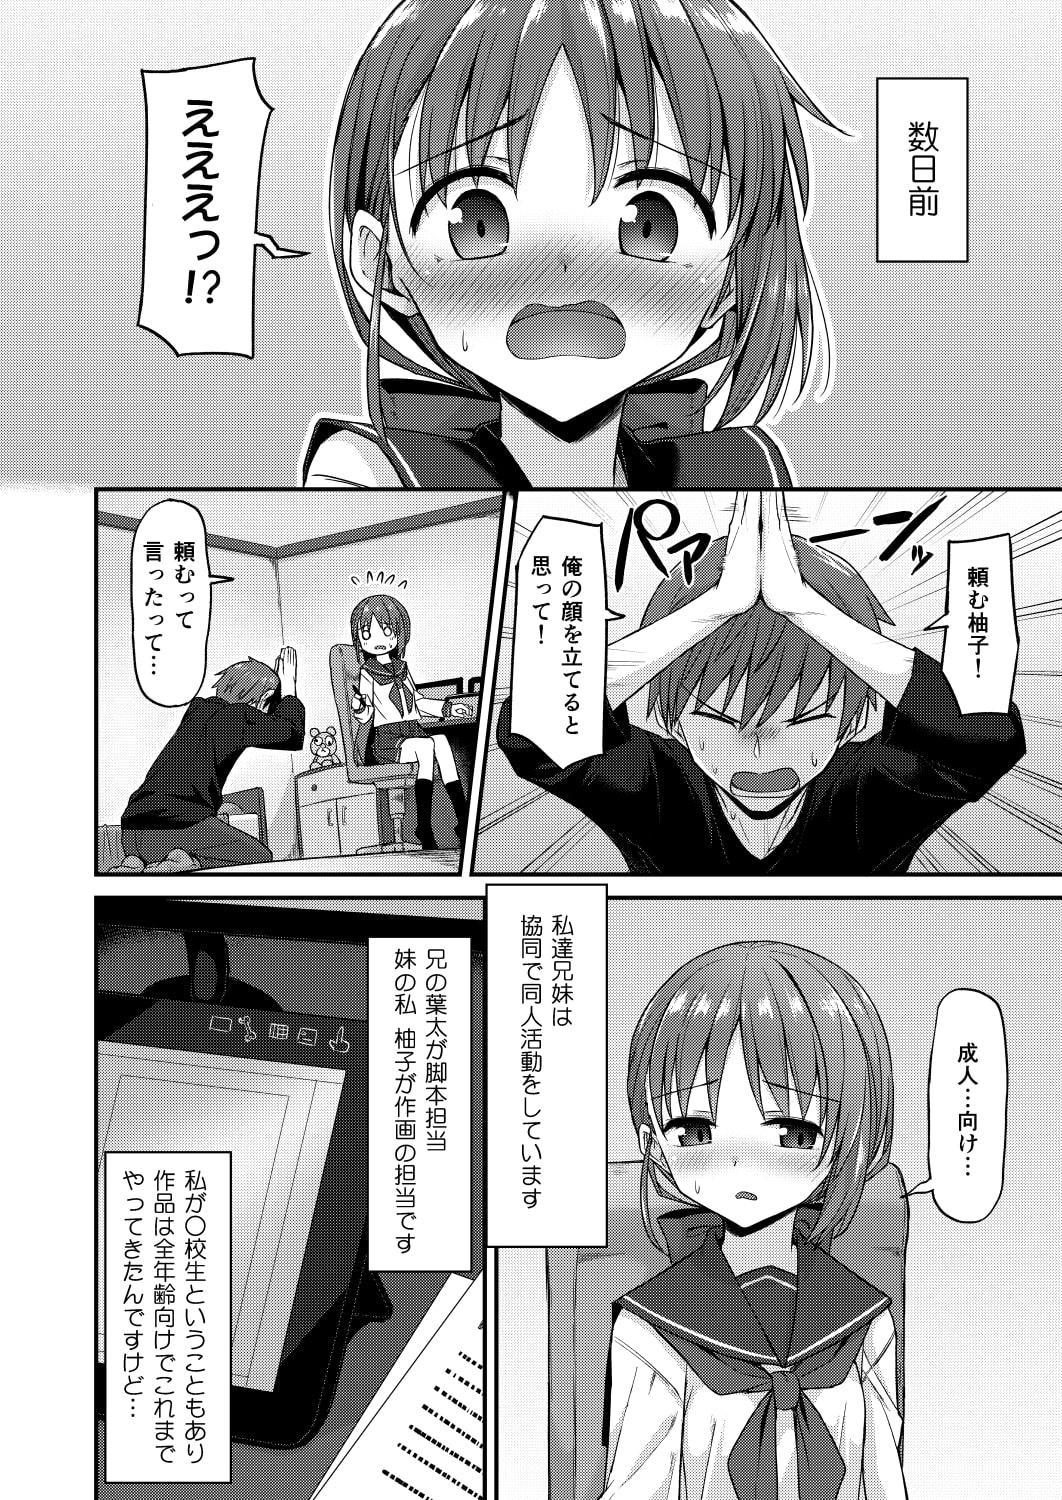 Doujin Siblings II - The Case of the Older Brother and Younger Sister.